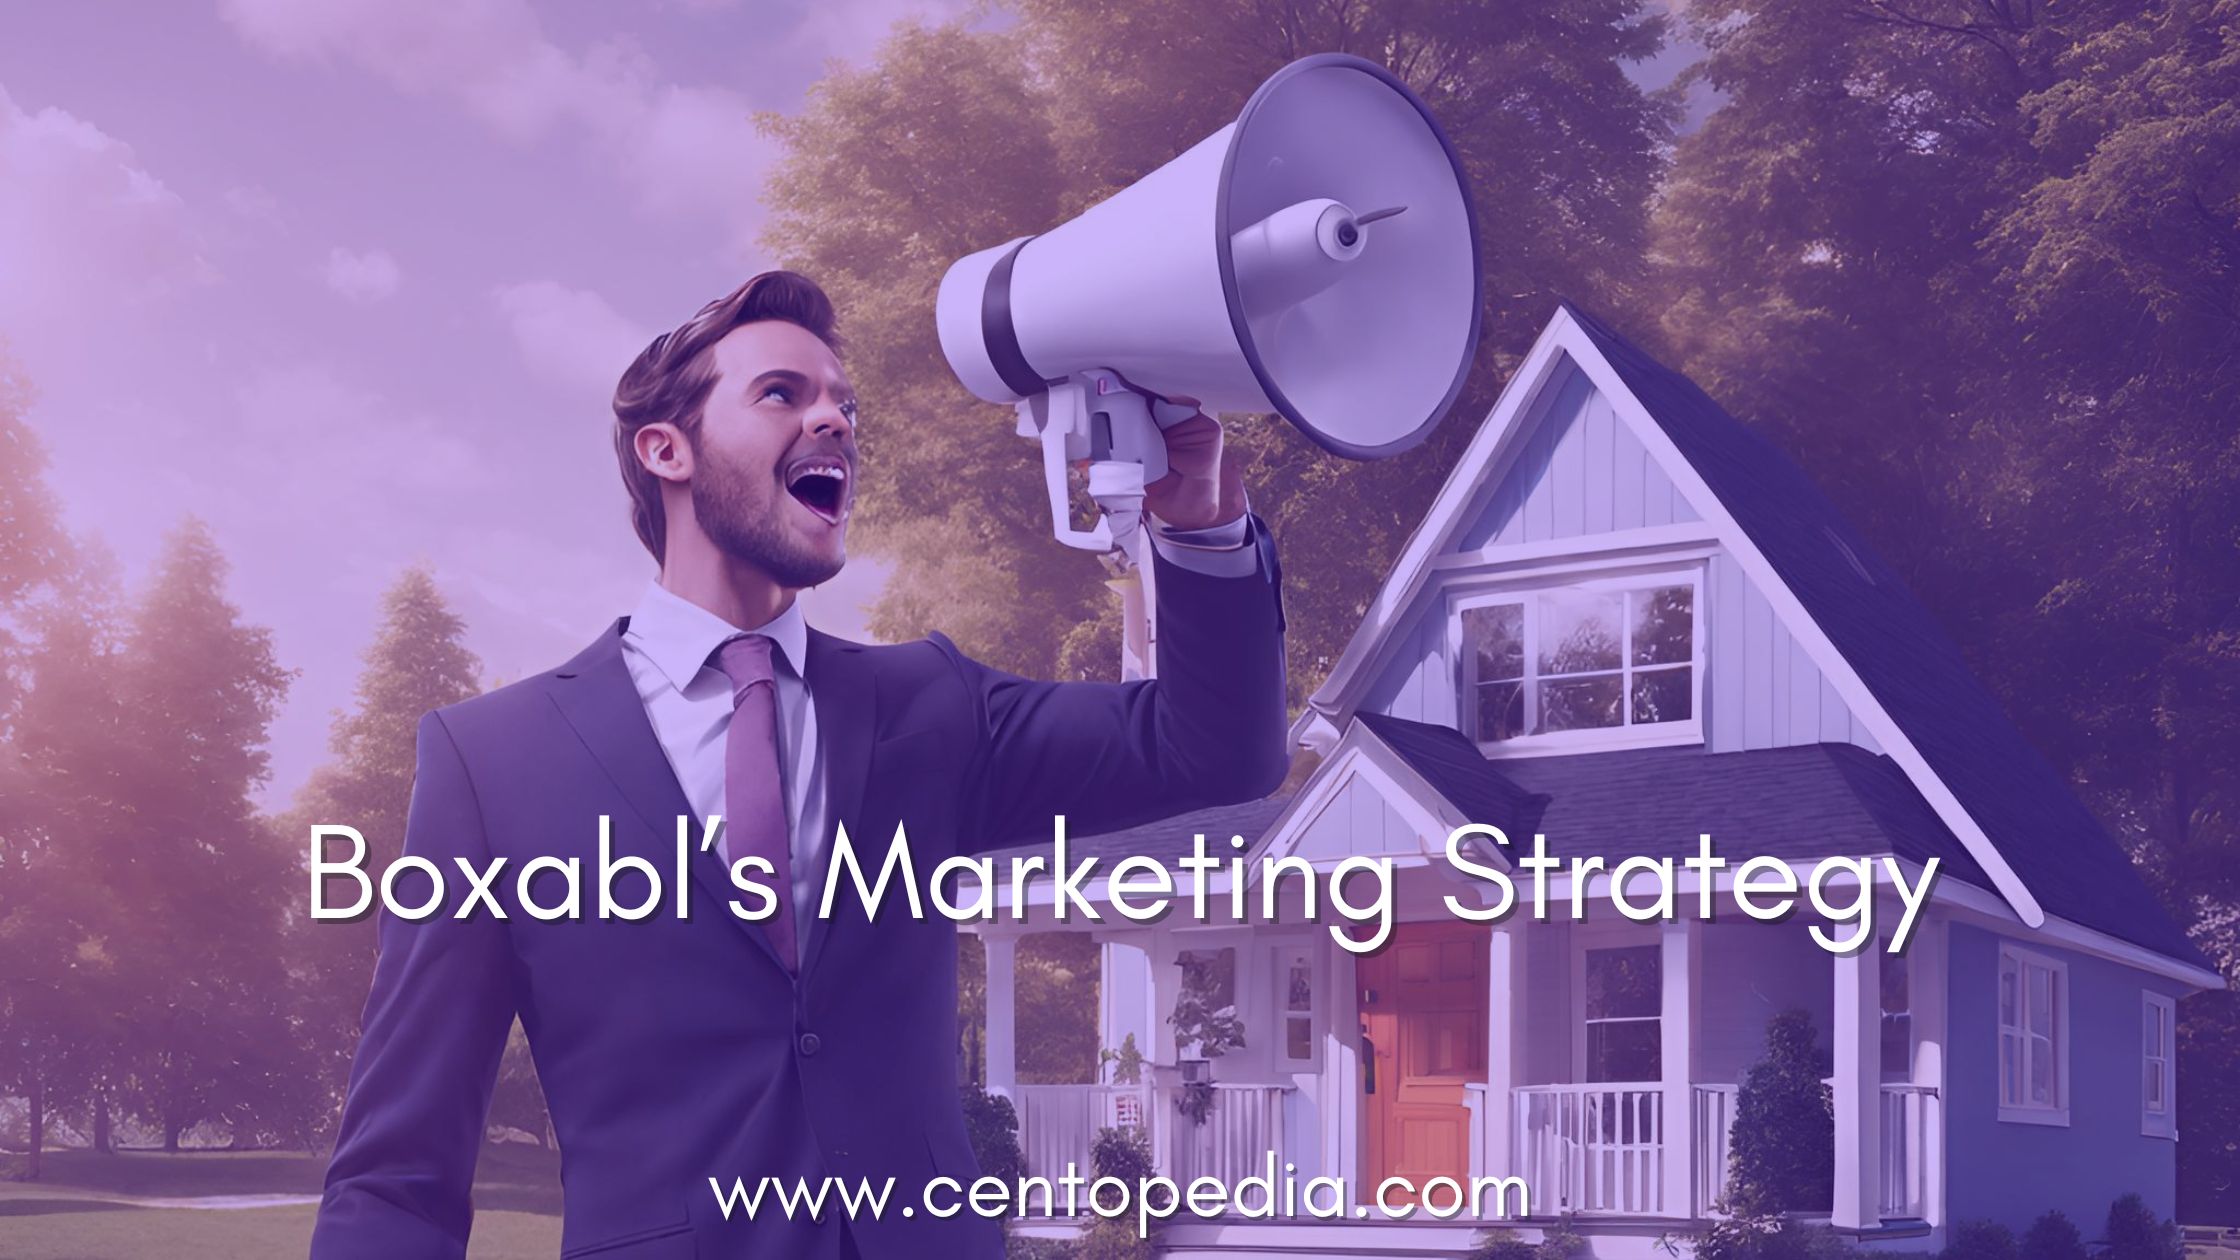 what is the marketing strategy of Boxabl